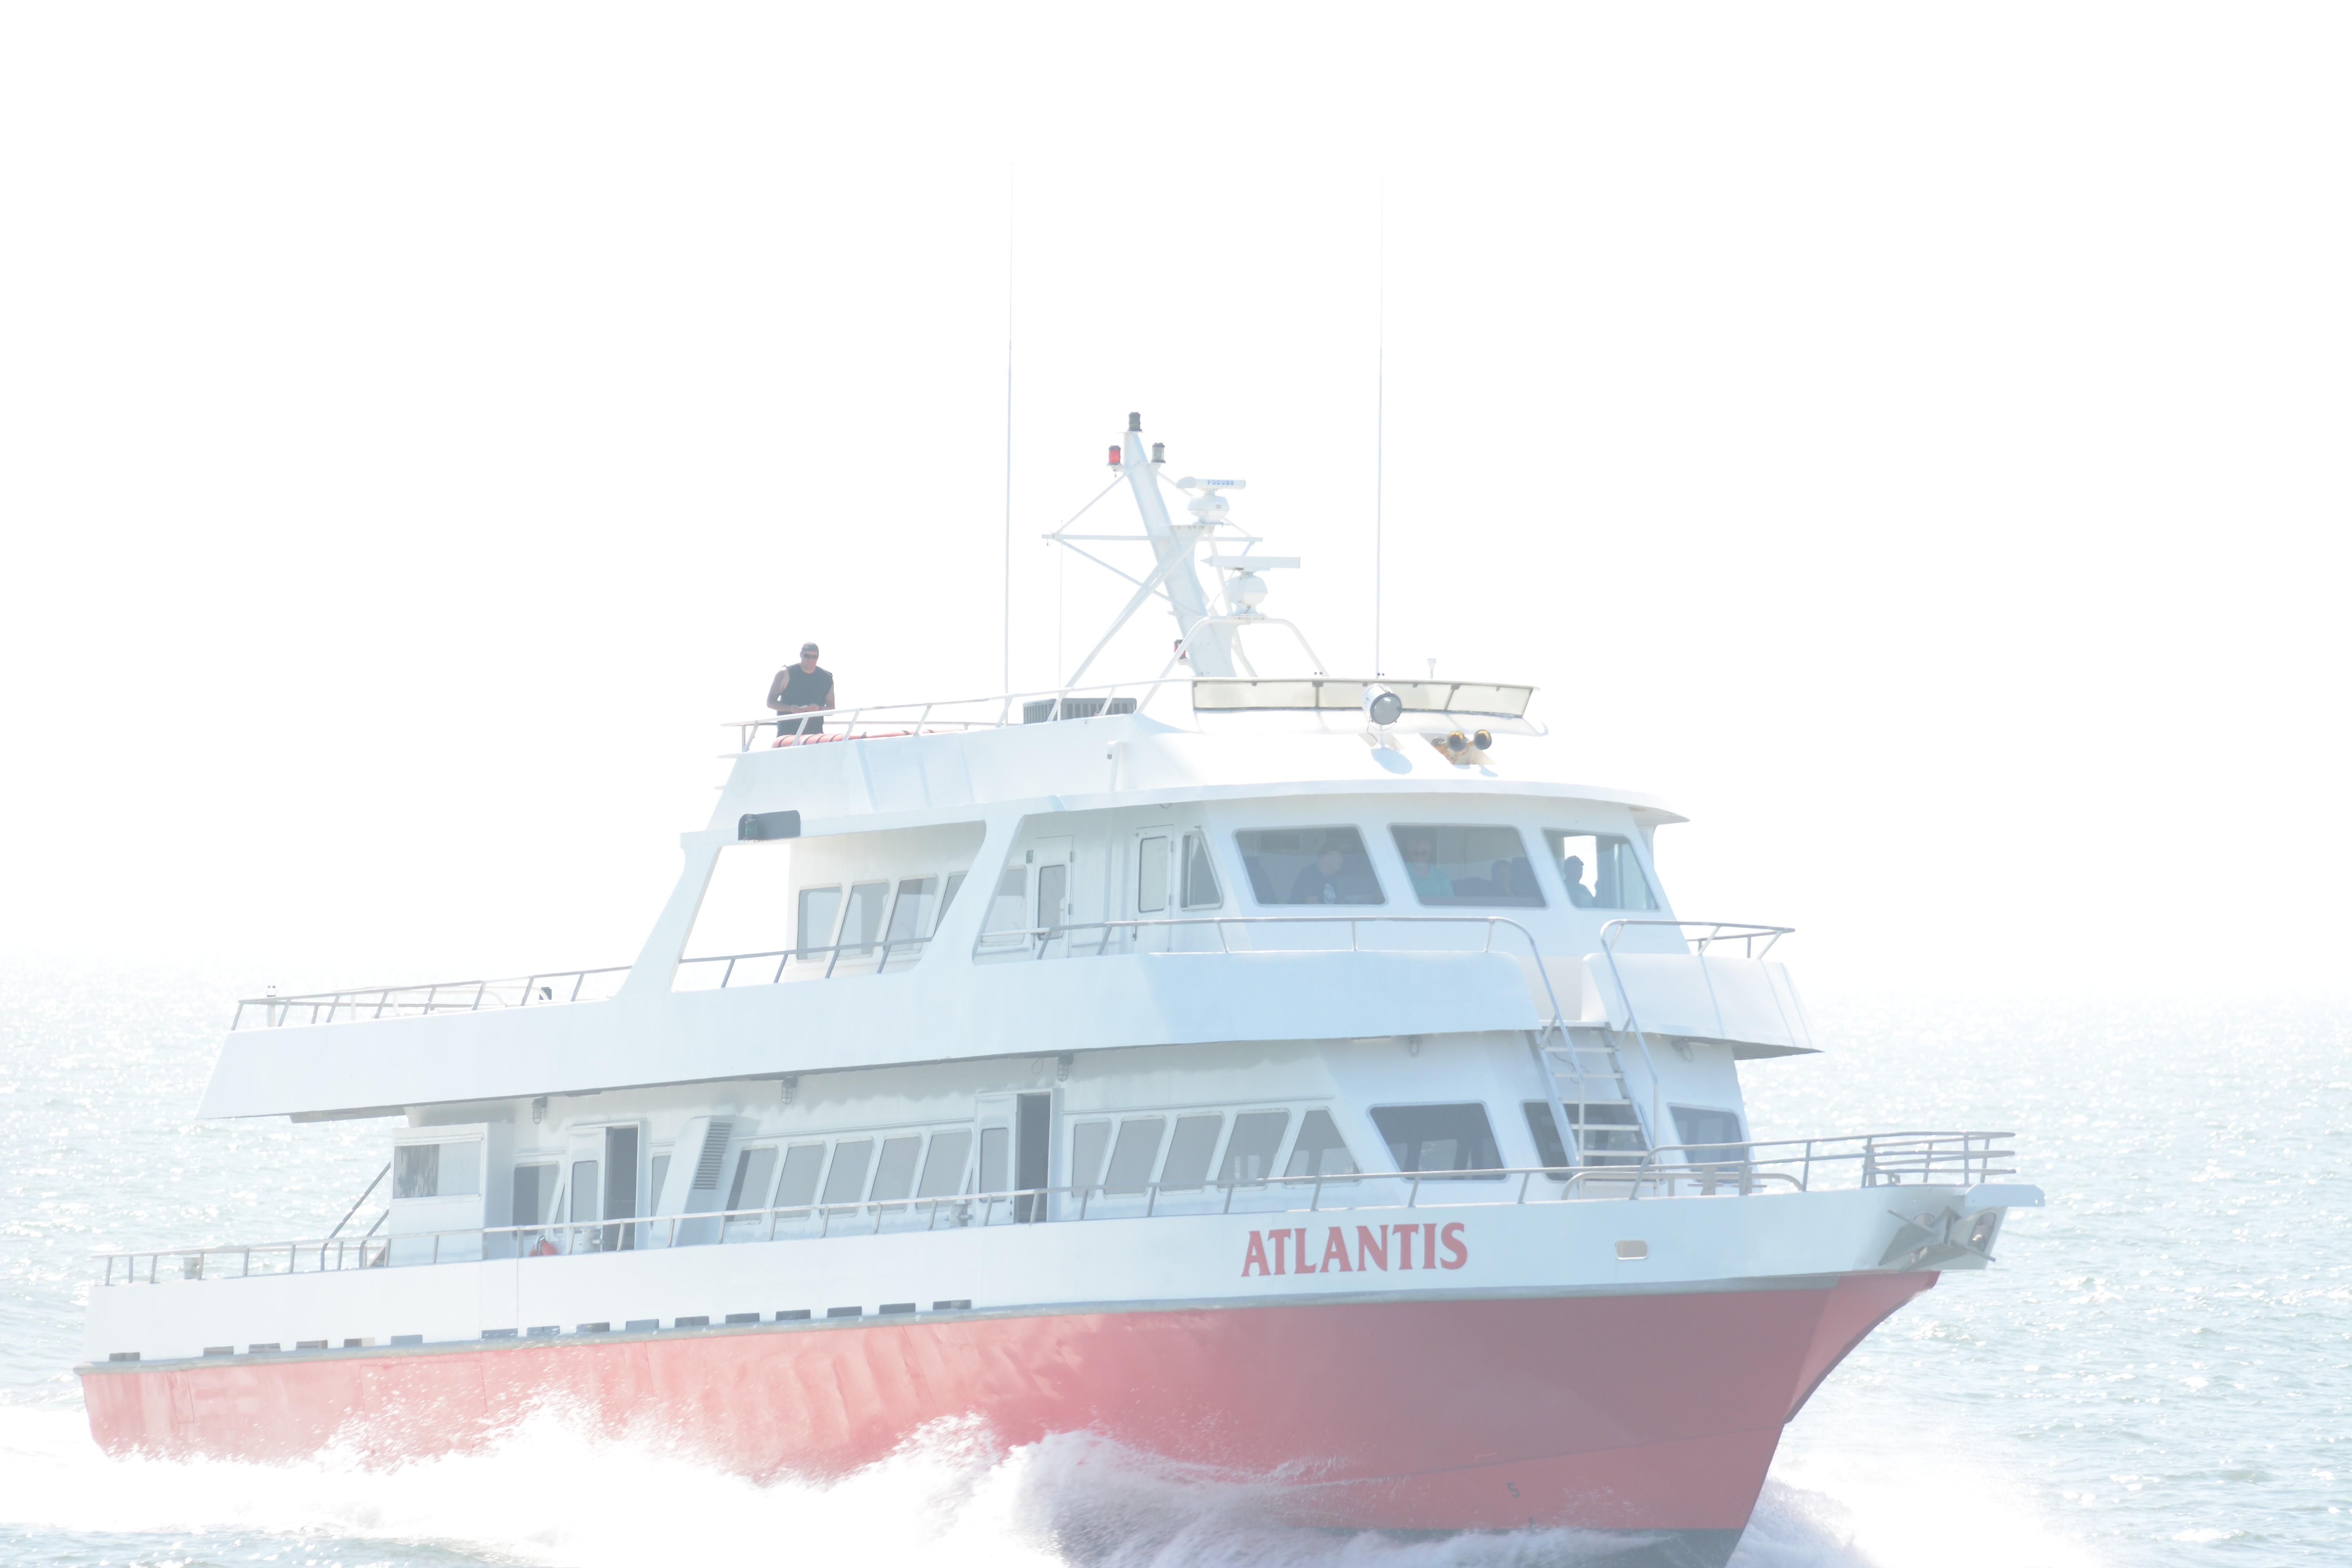 Atlantis Yacht for Sale, 125 Gulf Craft Yachts Cape May, NJ